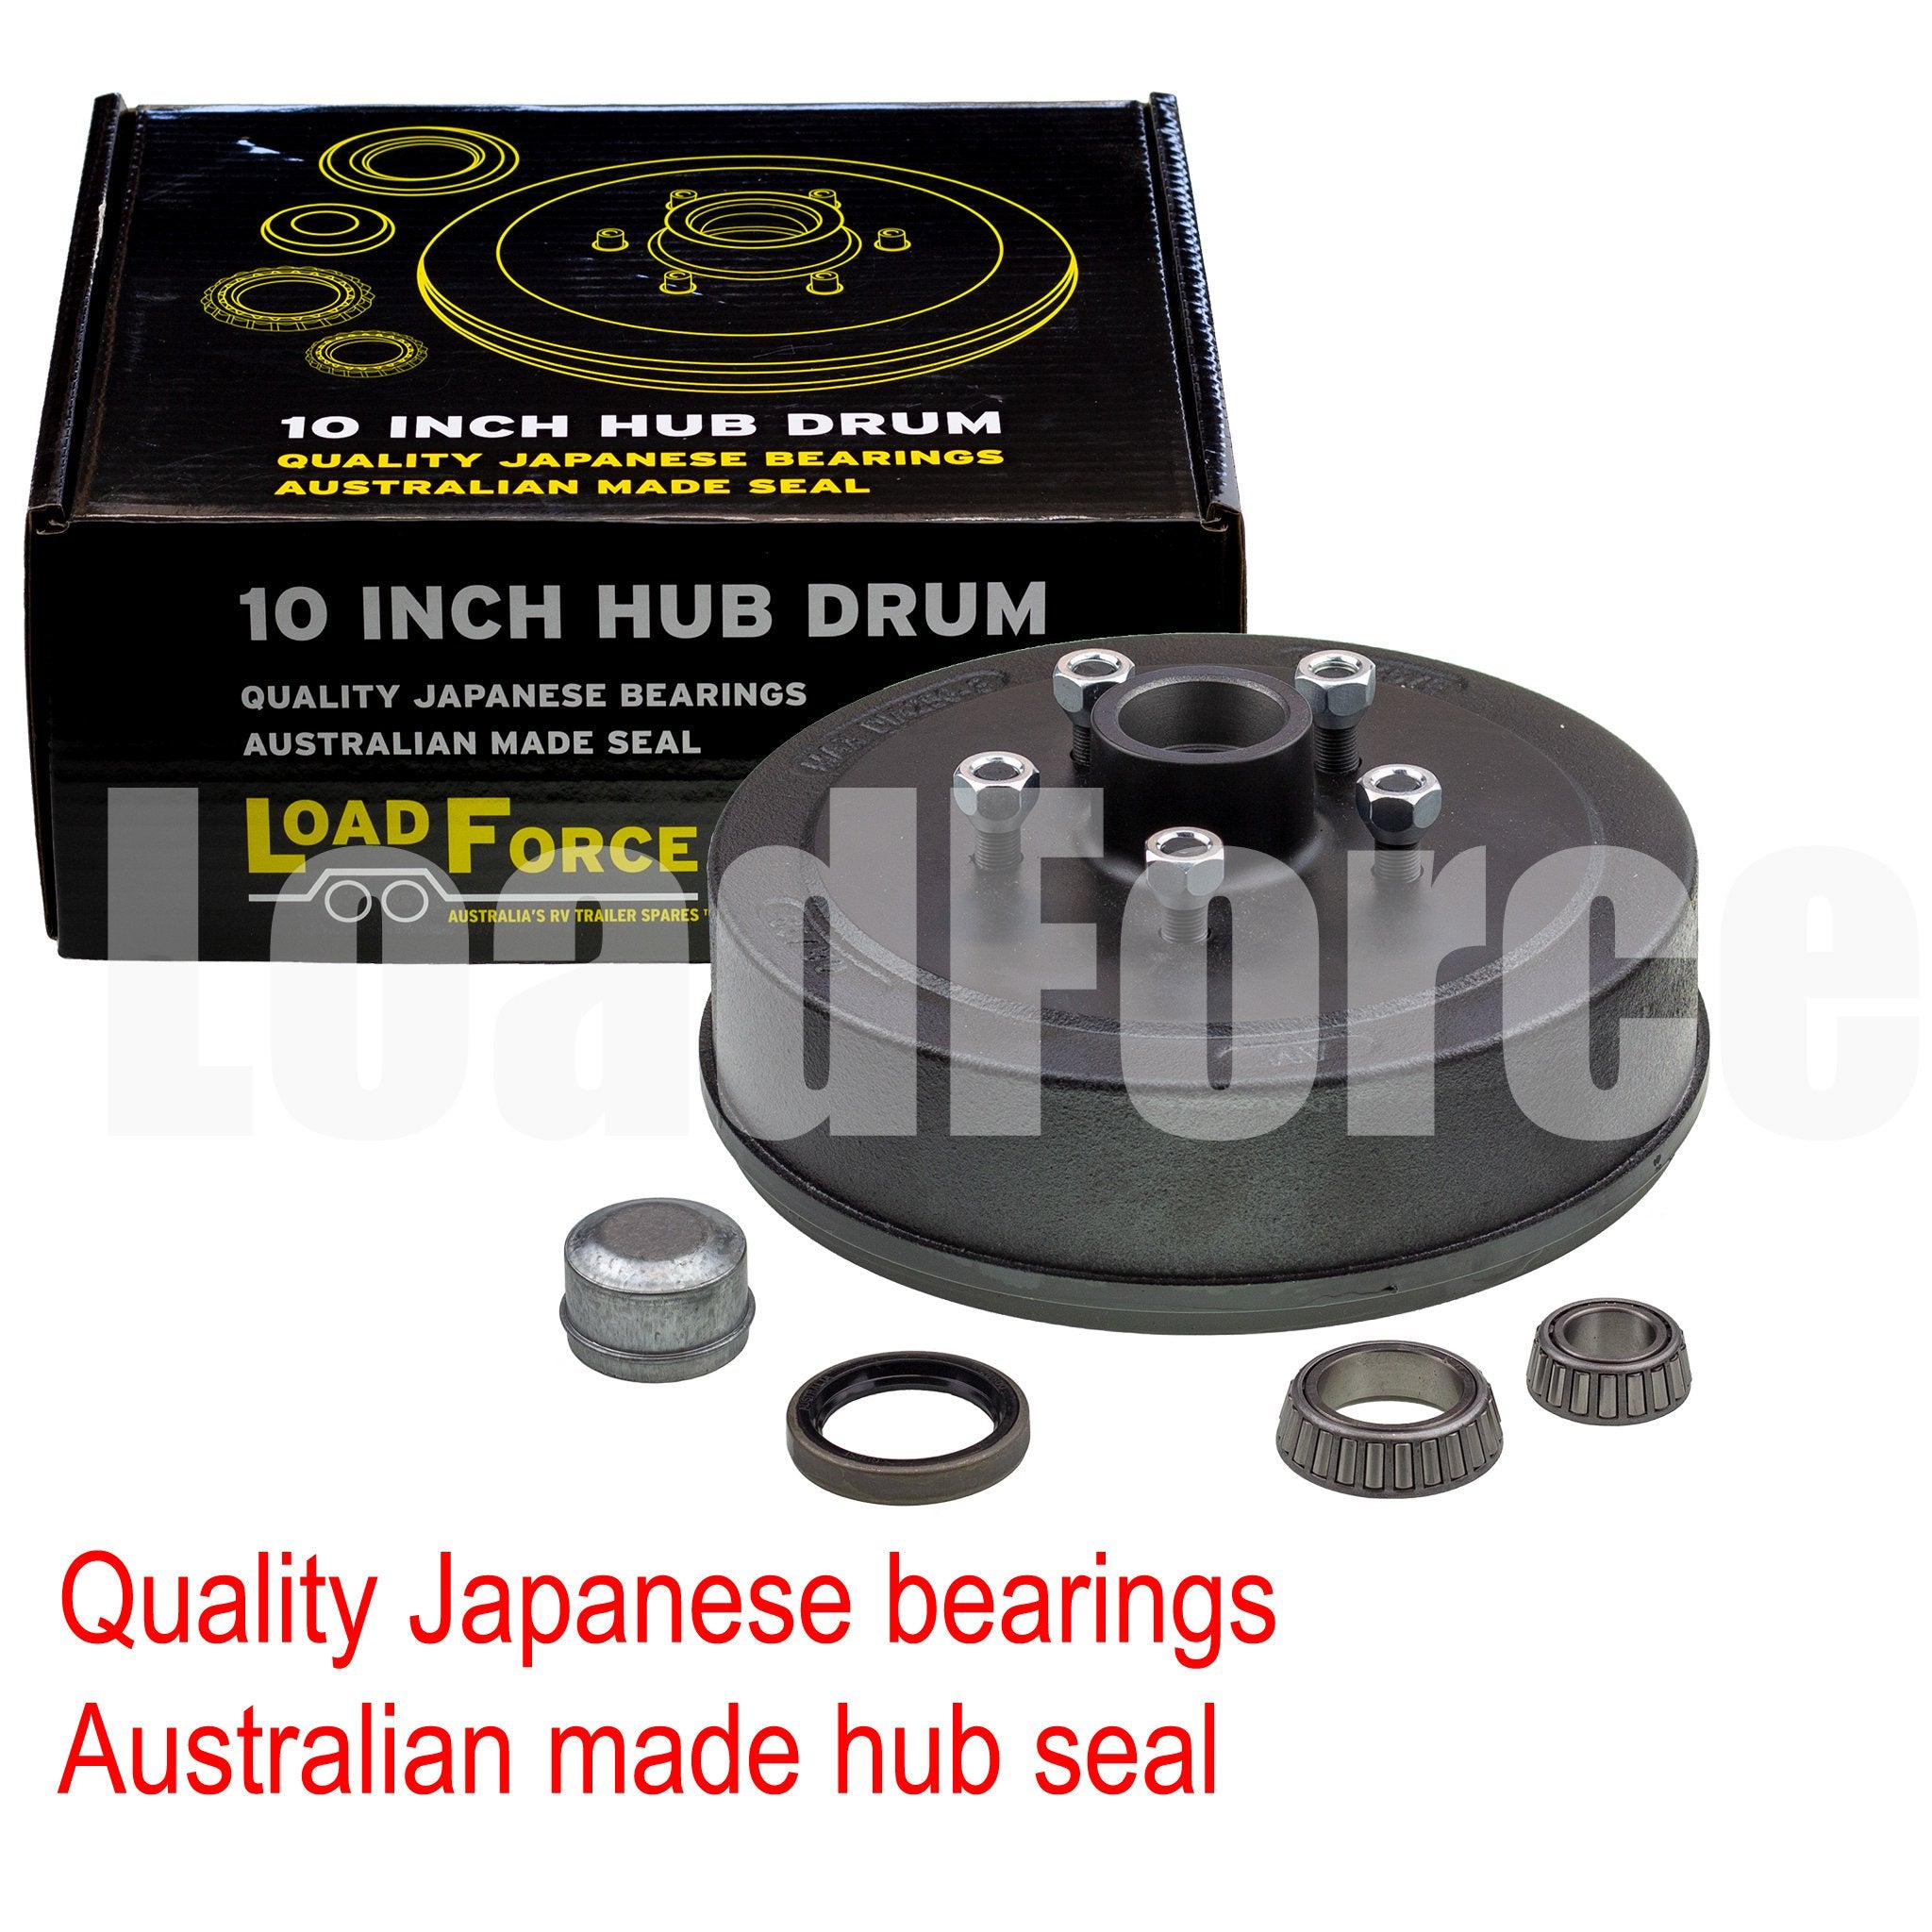 LoadForce Hub drum 10 x 2.25 inch HQ 5 stud with LM (Holden) bearing